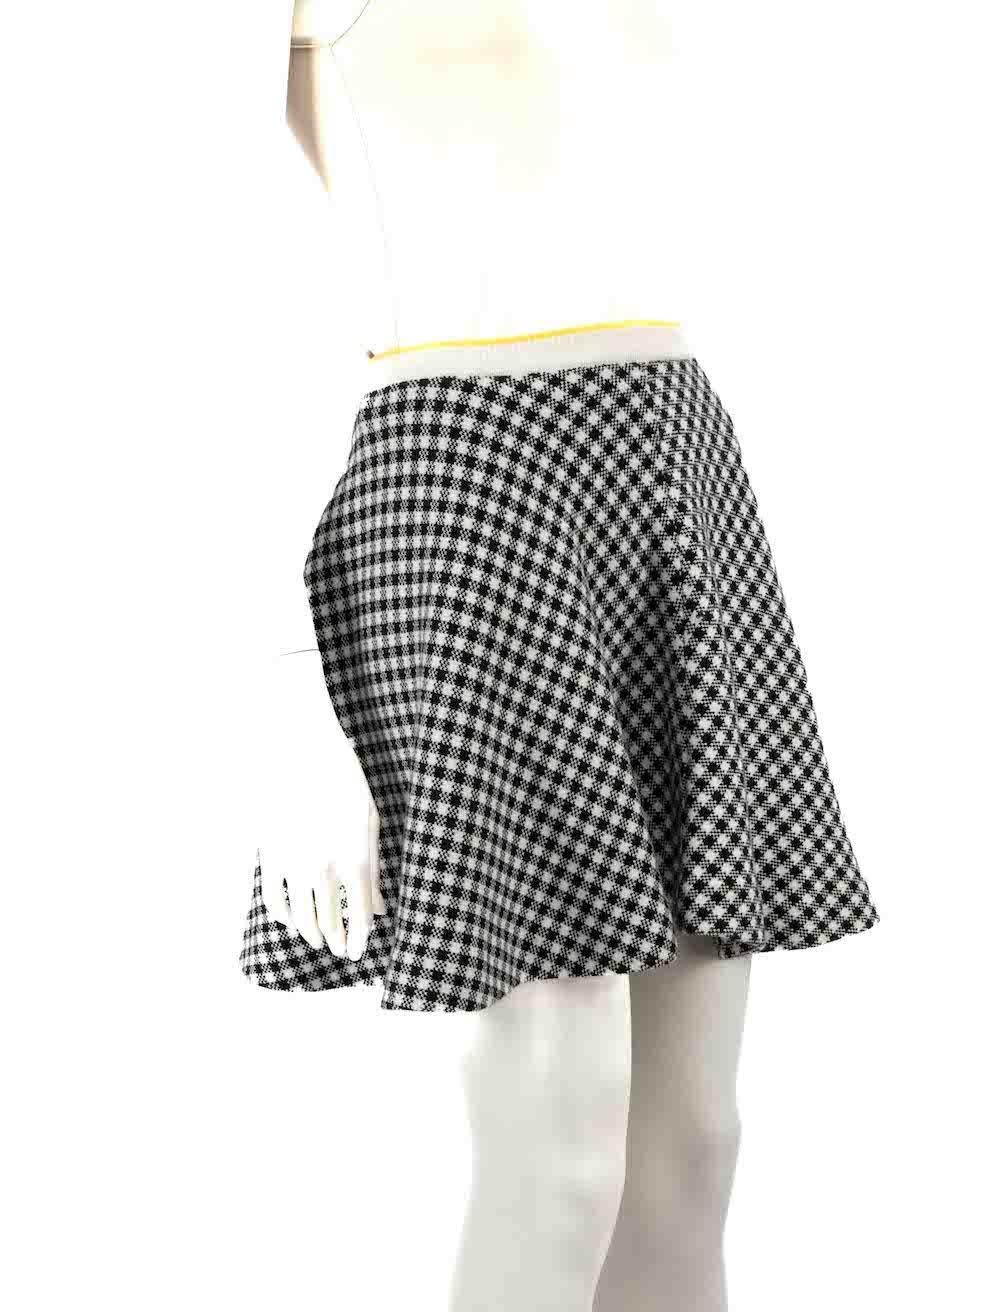 CONDITION is Very good. Minimal wear to skirt is evident. Minimal wear to front with a pluck to the weave as well as minor discolouration seen on this used Miu Miu designer resale item.
 
 
 
 Details
 
 
 Multicolour - black and white
 
 Cotton
 
